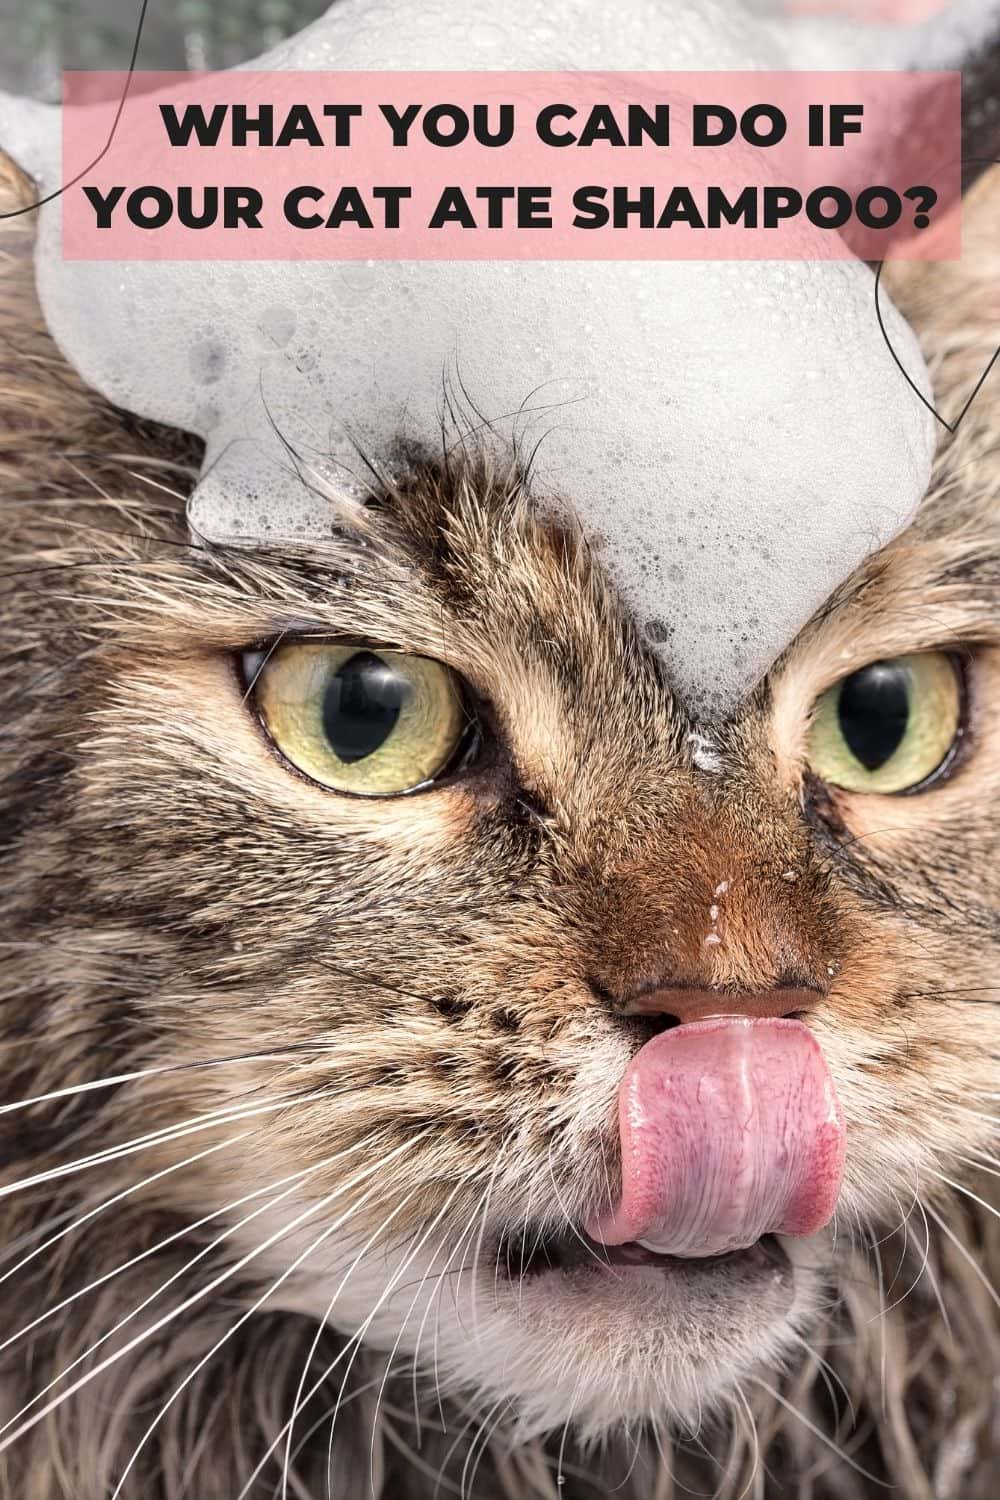 What If My Cat Eats Shampoo? 5 Things You Should Know